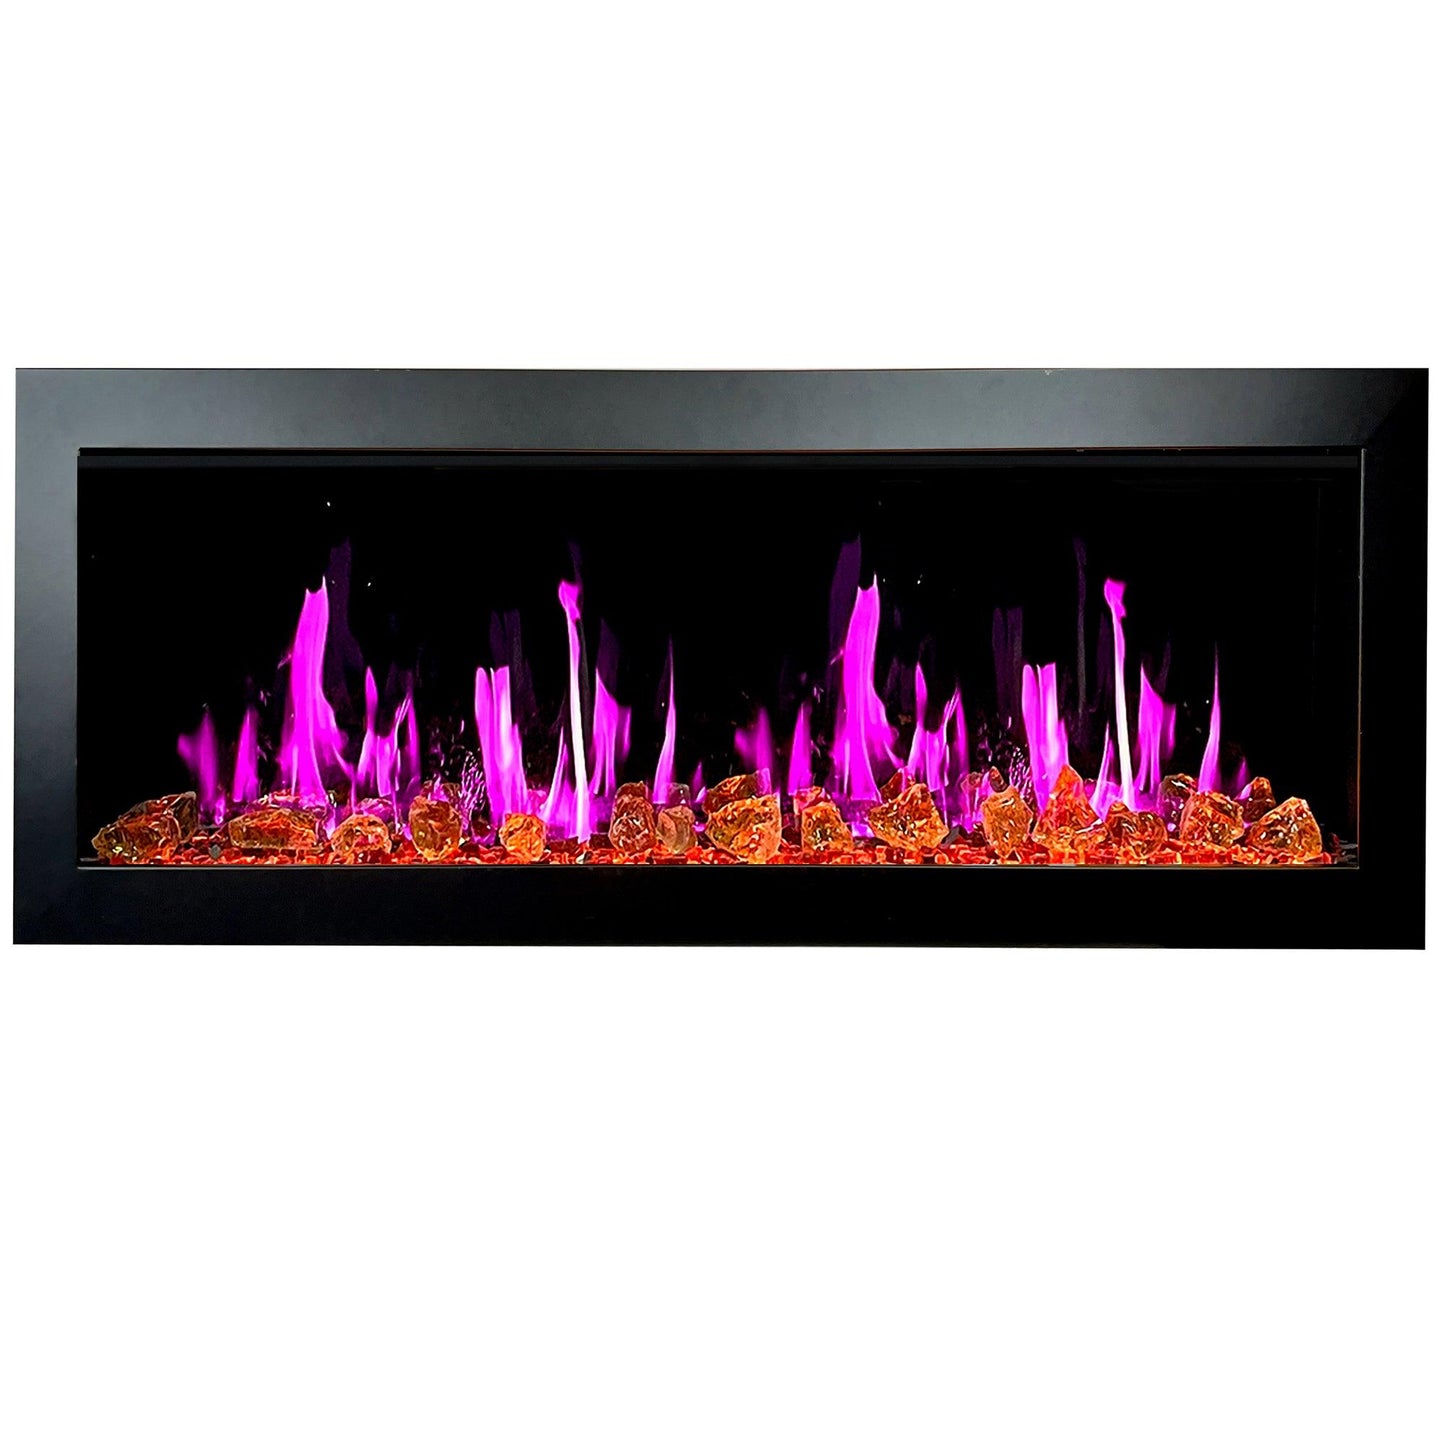 ZopaFlame™ 47" Linear Wall-mount Electric Fireplace - BG17488X - ZopaFlame Fireplaces